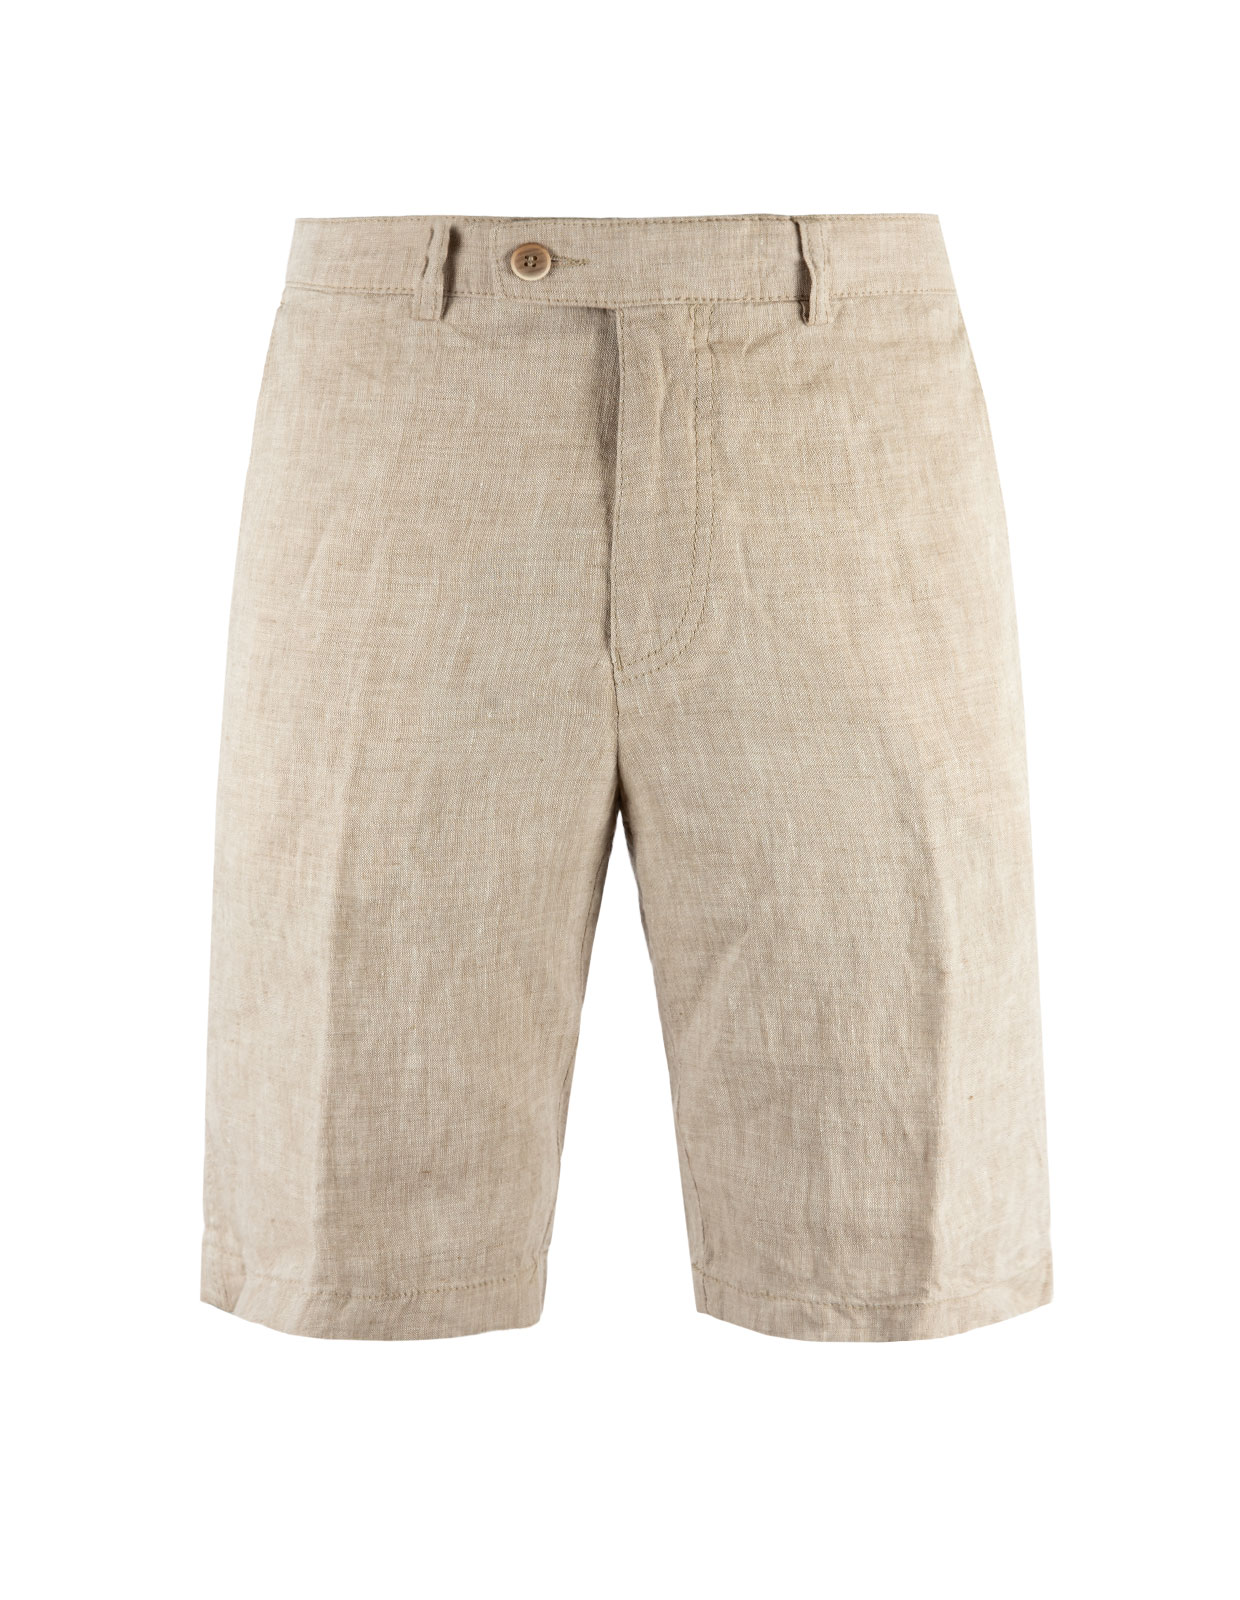 SS23 Shorts Linne Taupe